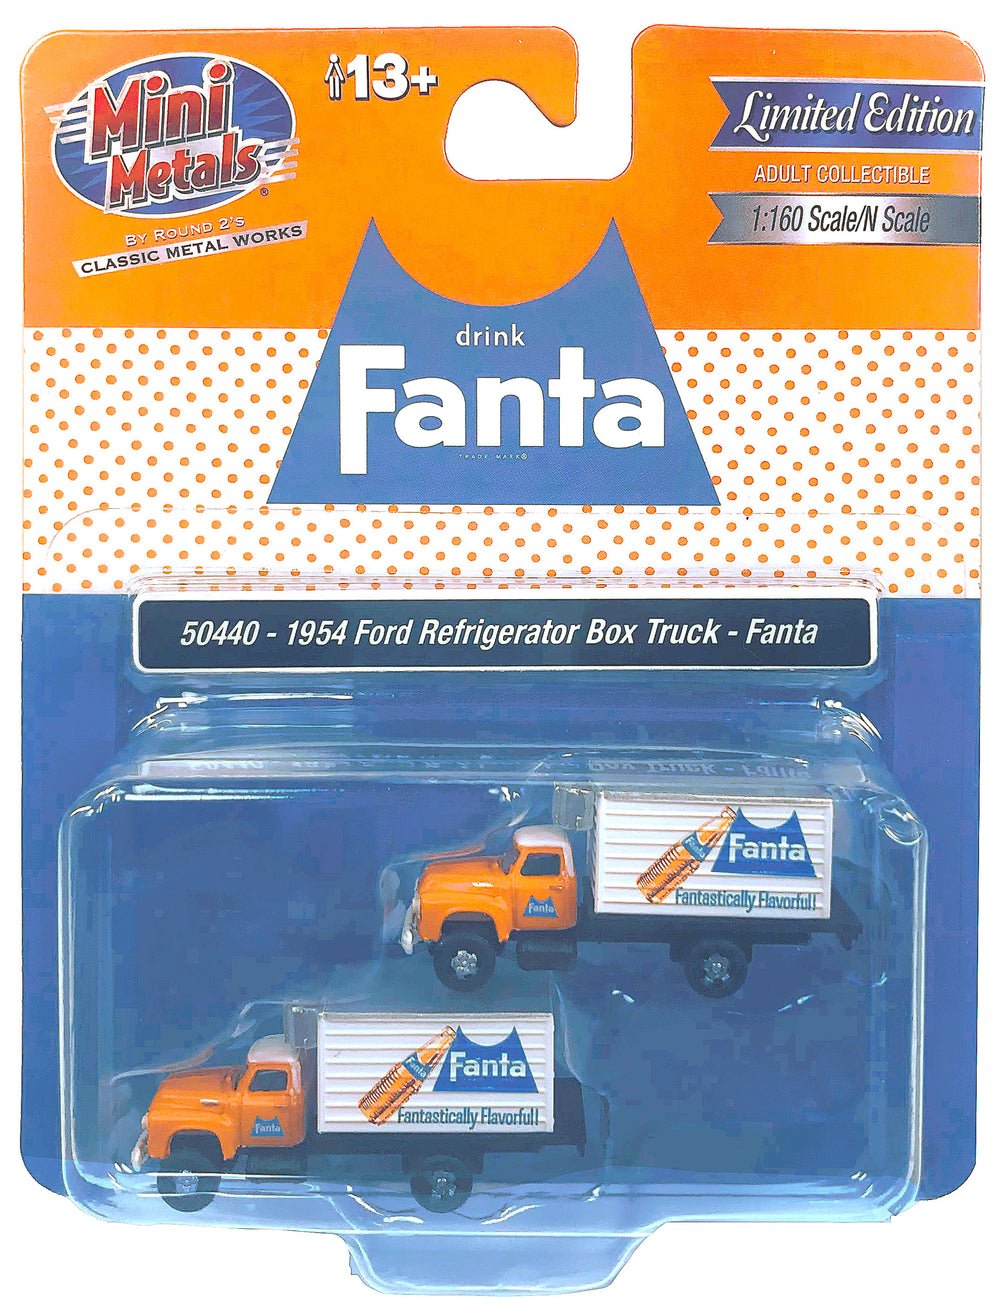 Classic Metal Works 1954 Ford Refrigerated Box Truck 2-Pack (Fanta) 1:160 N Scale